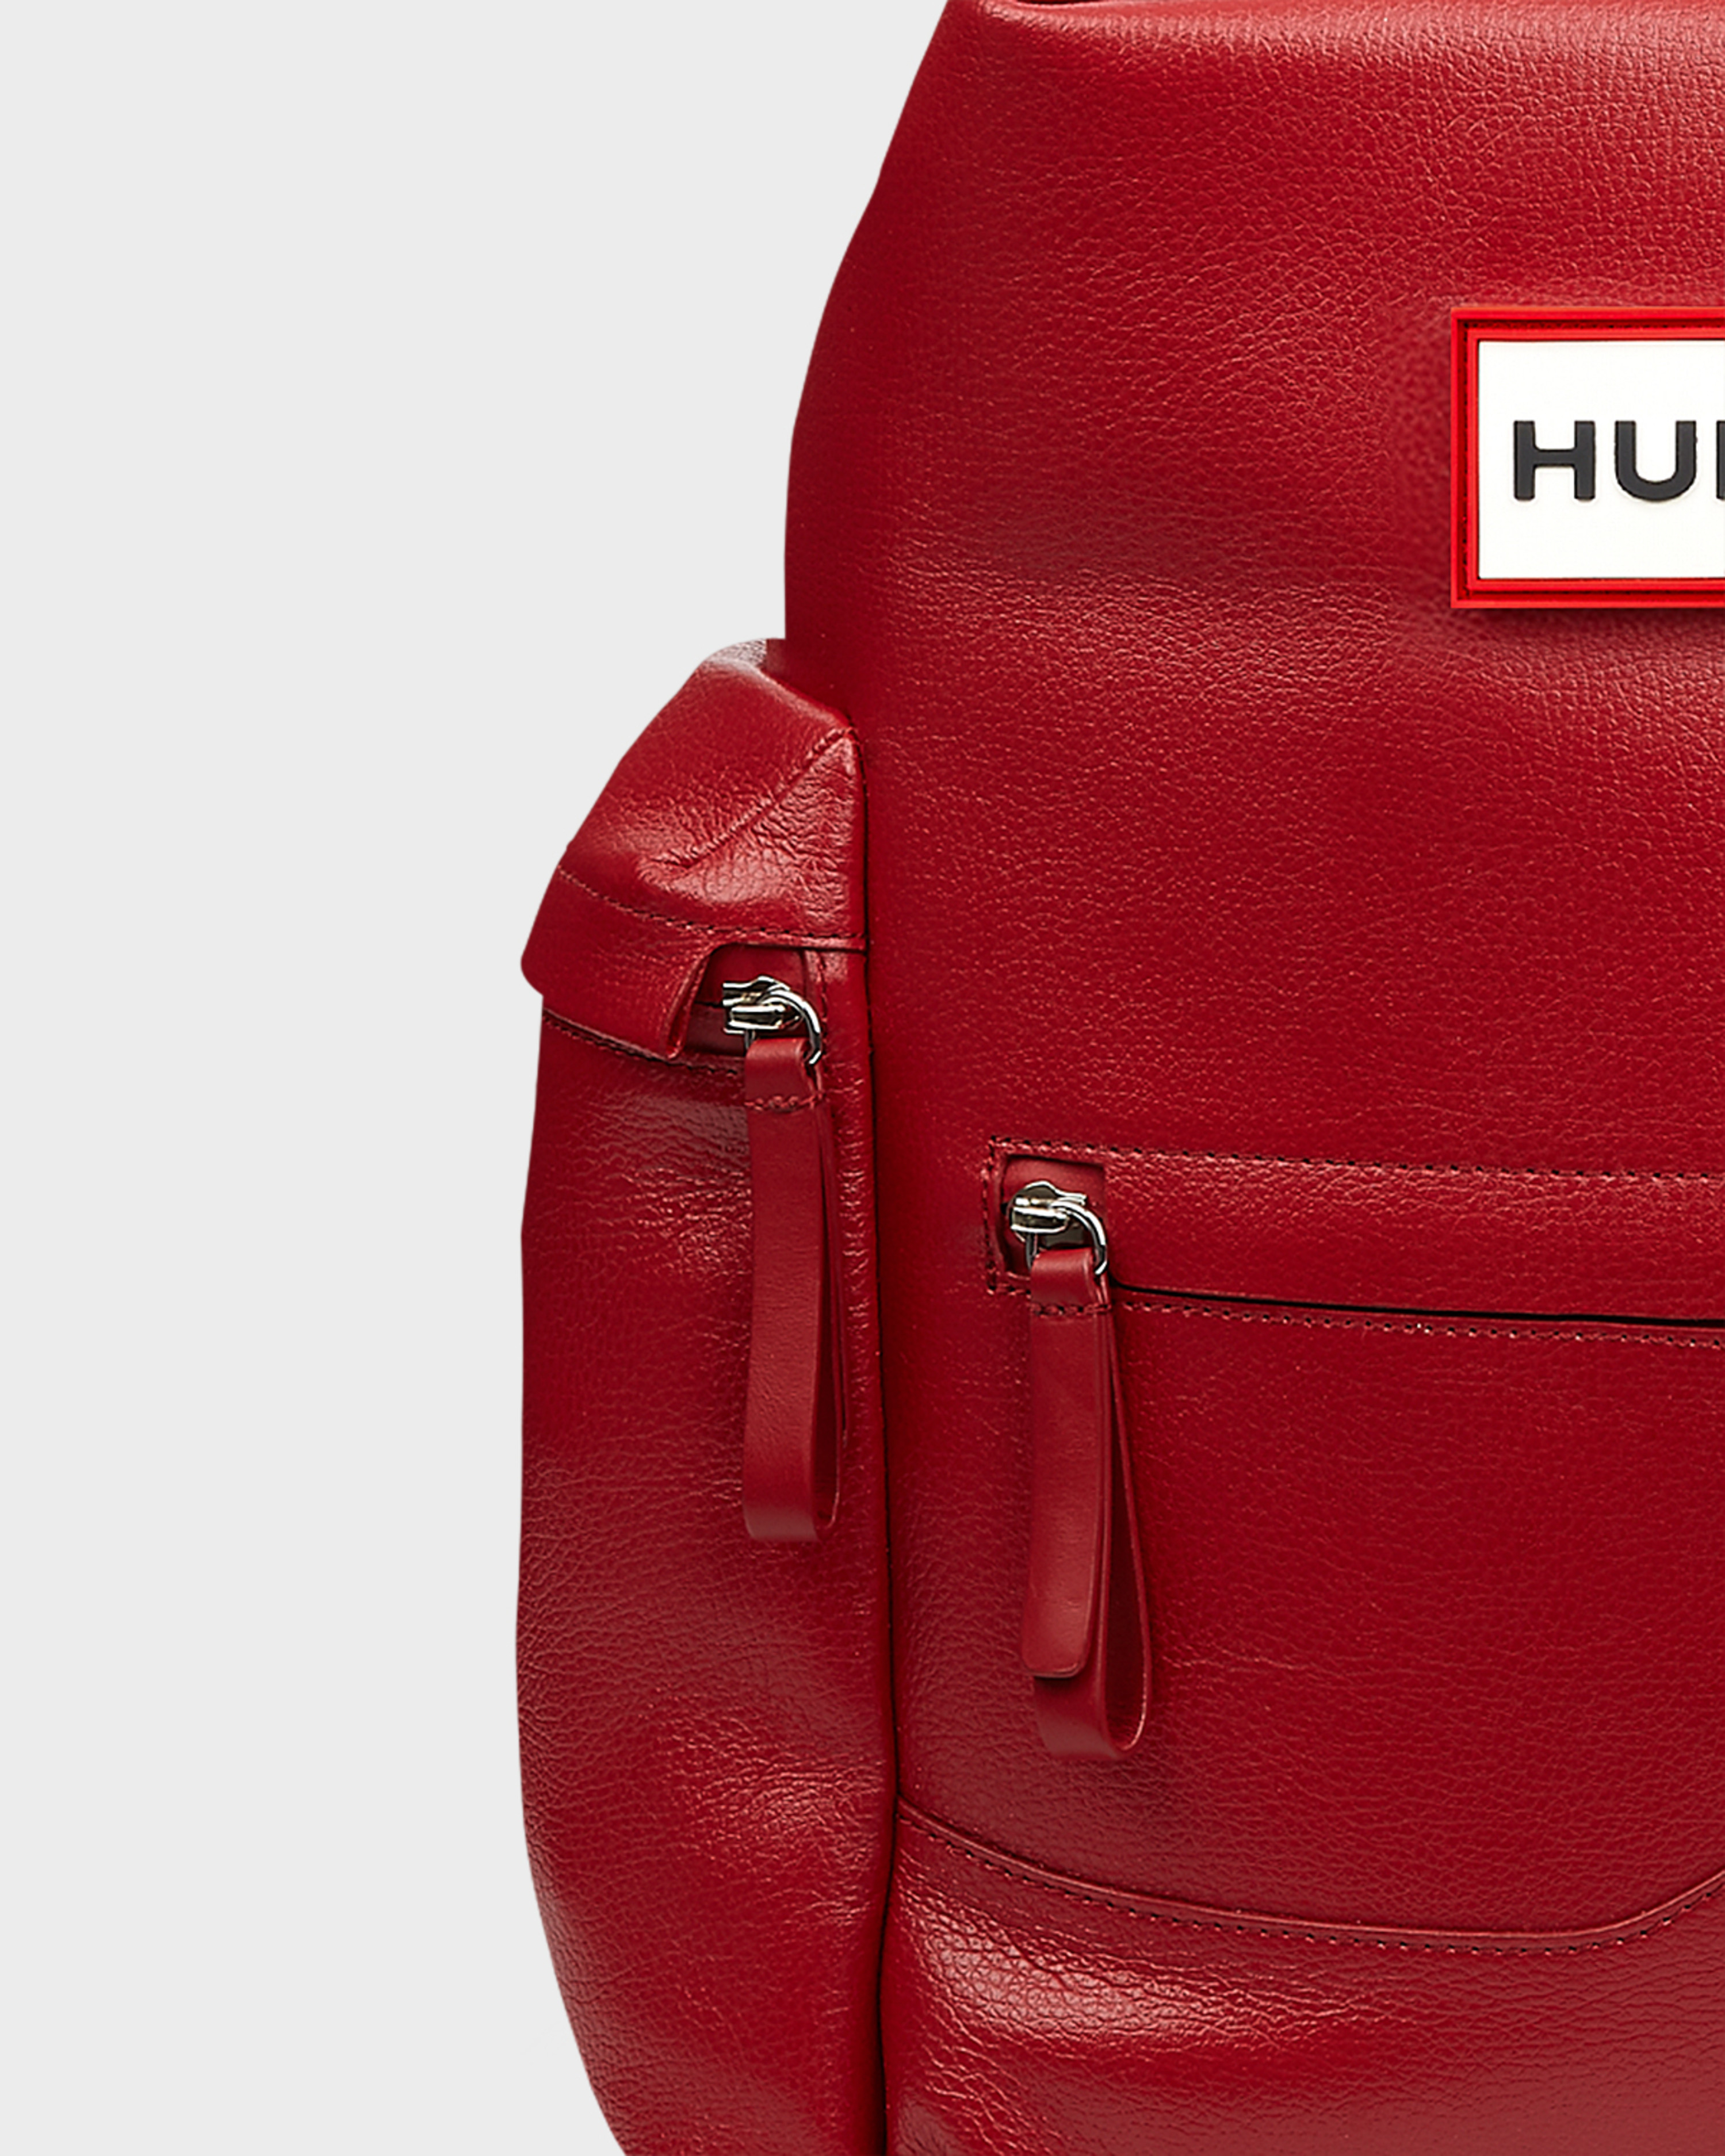 Lyst - Hunter Original Top Clip Leather Backpack in Red for Men